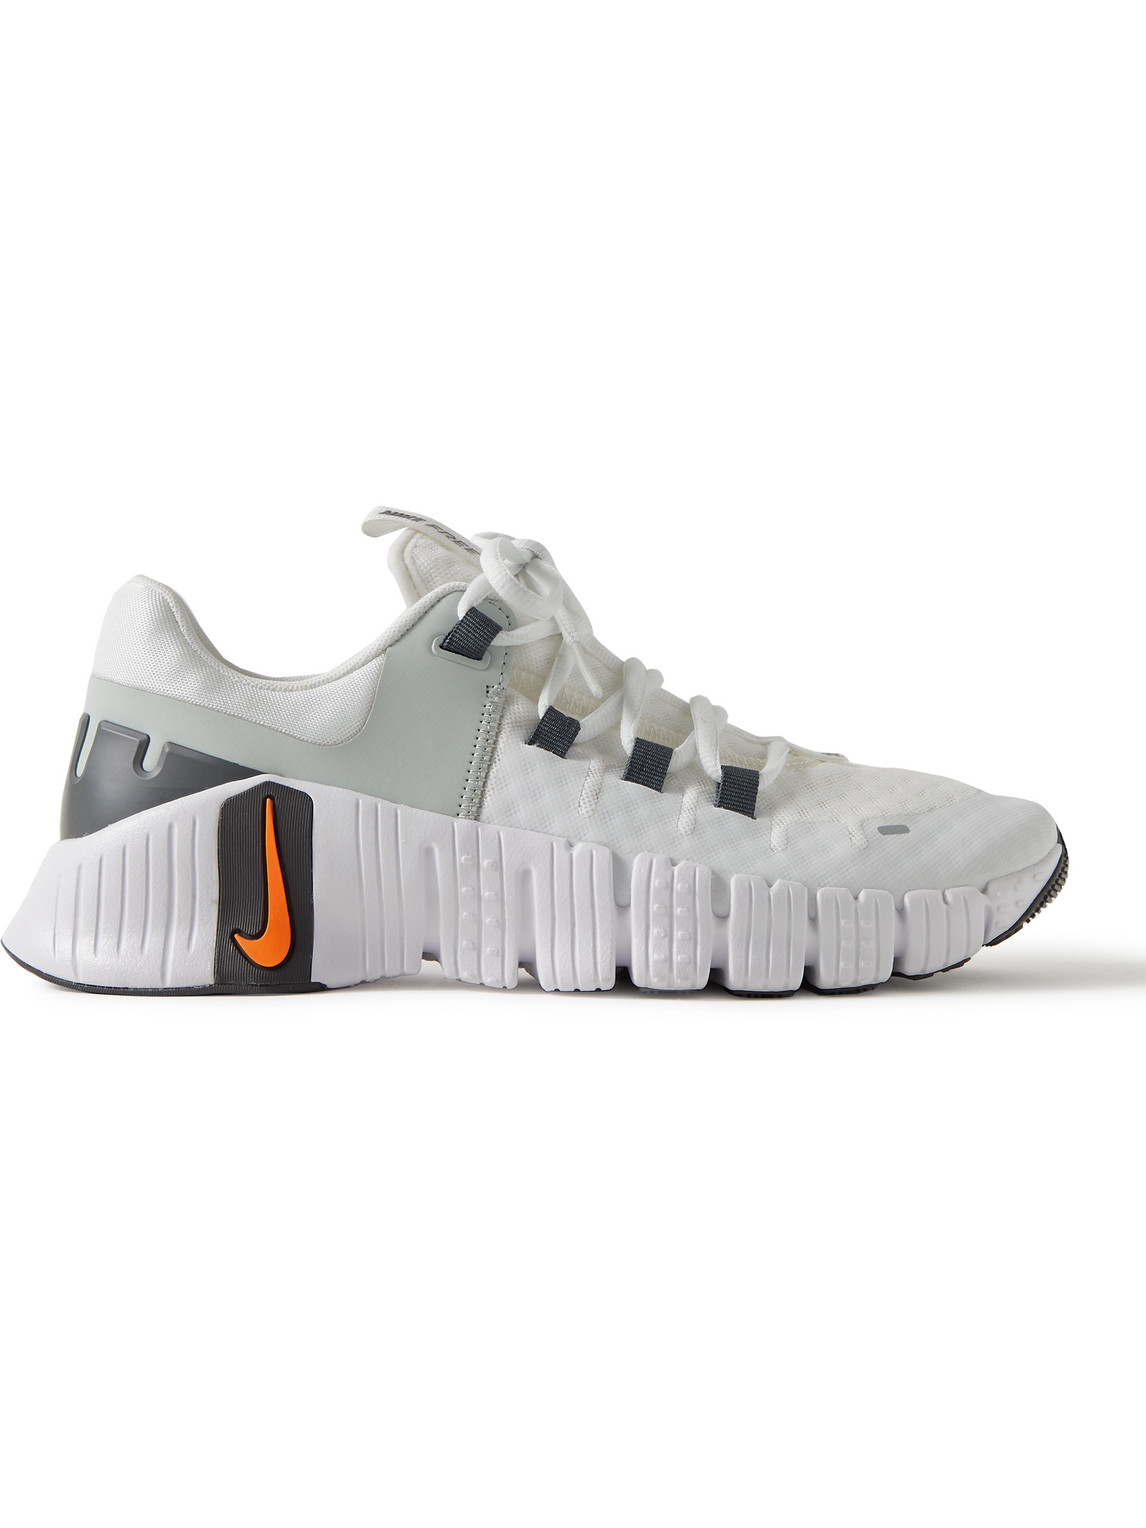 Nike Free Metcon 5 Rubber-trimmed Mesh Sneakers In Gray